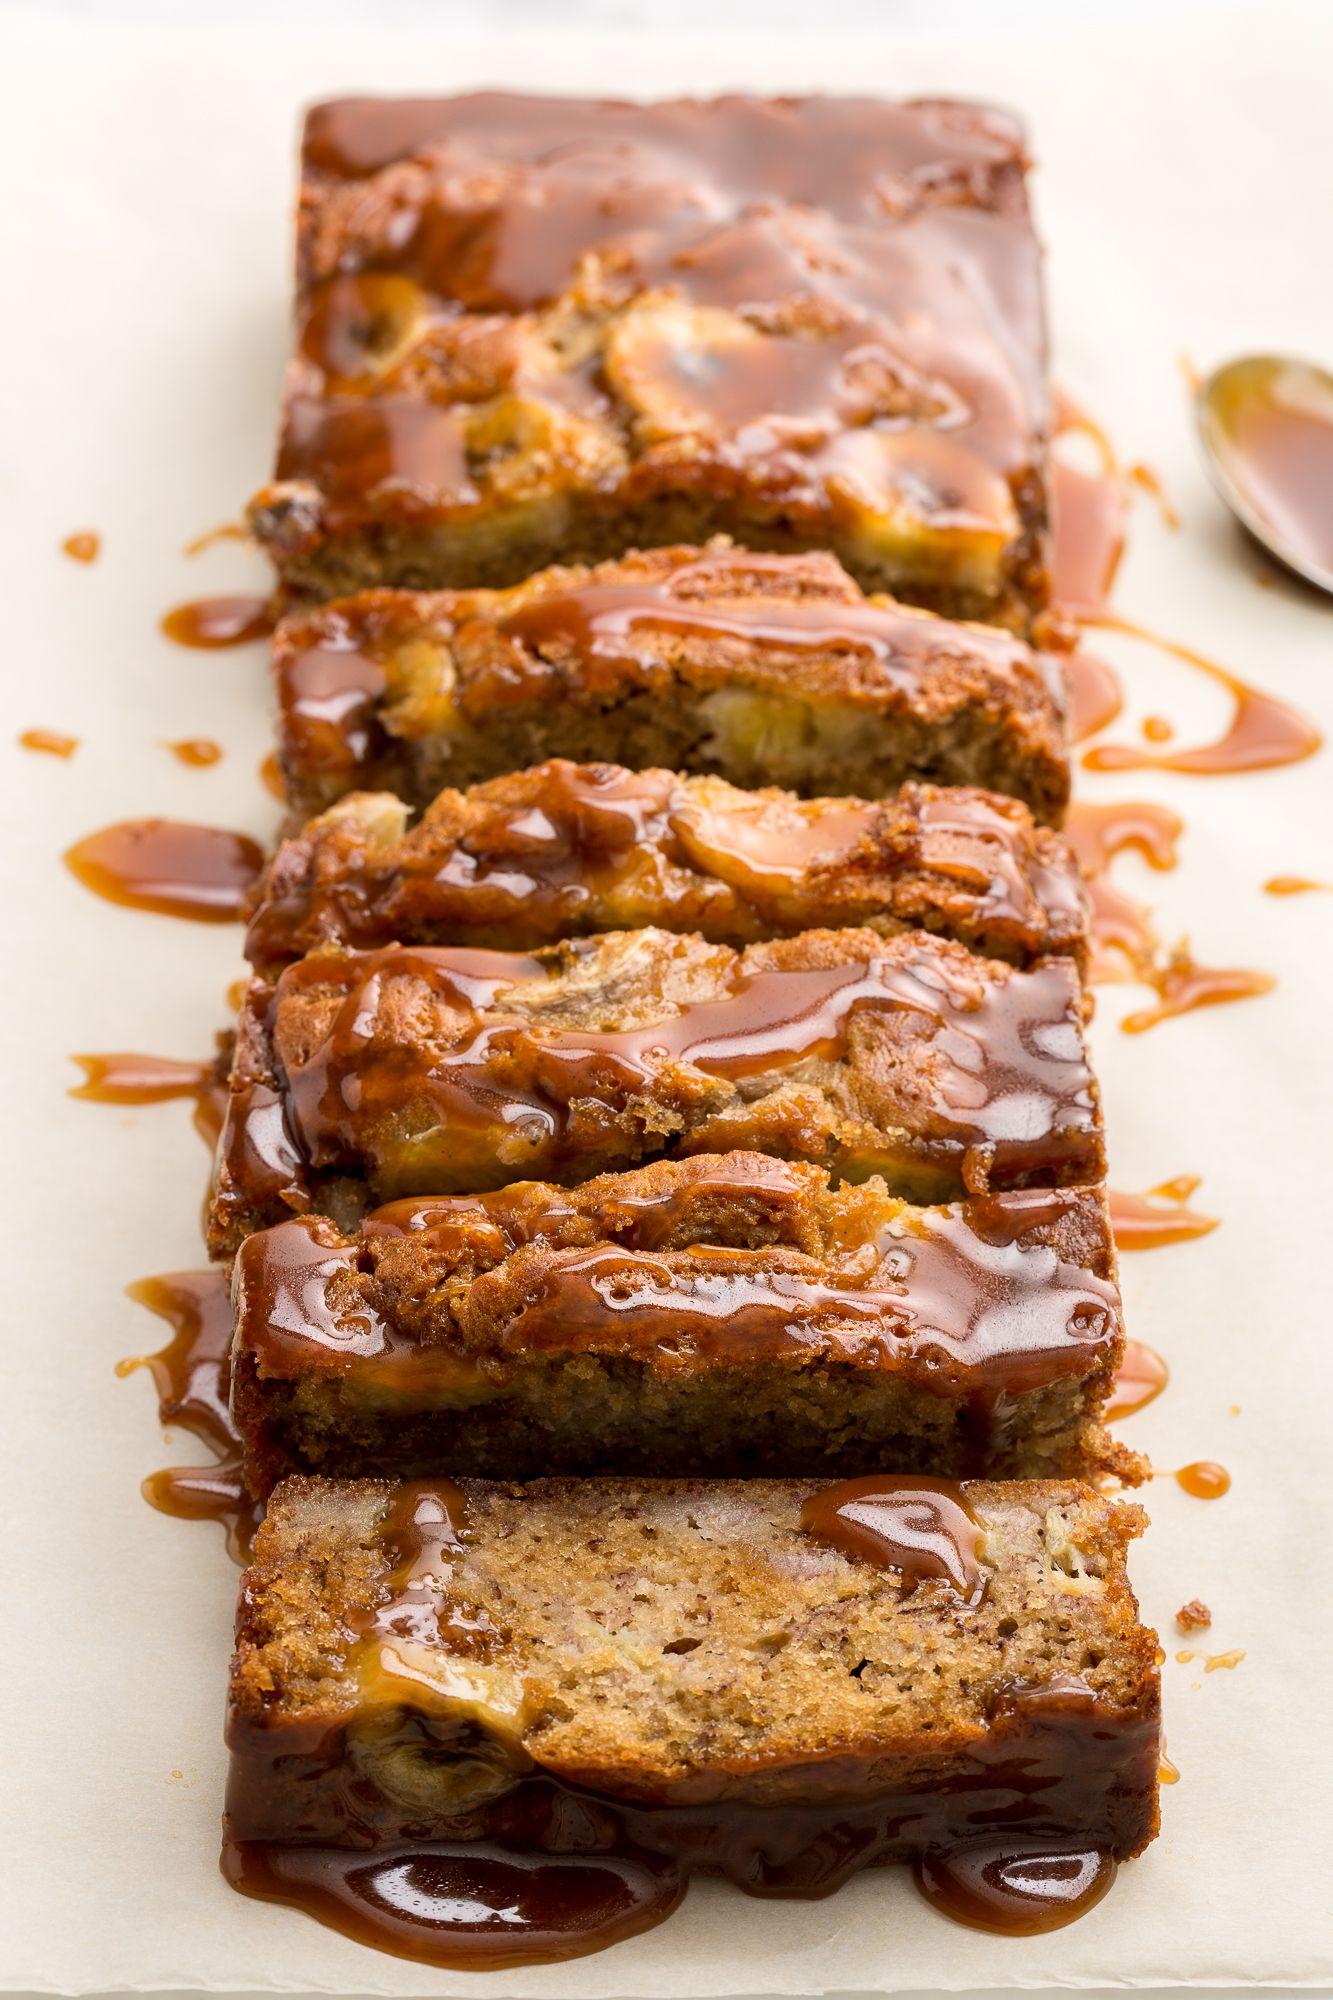 Best Salted Caramel Banana Bread Recipe - How to Make Salted Caramel Banana  Bread